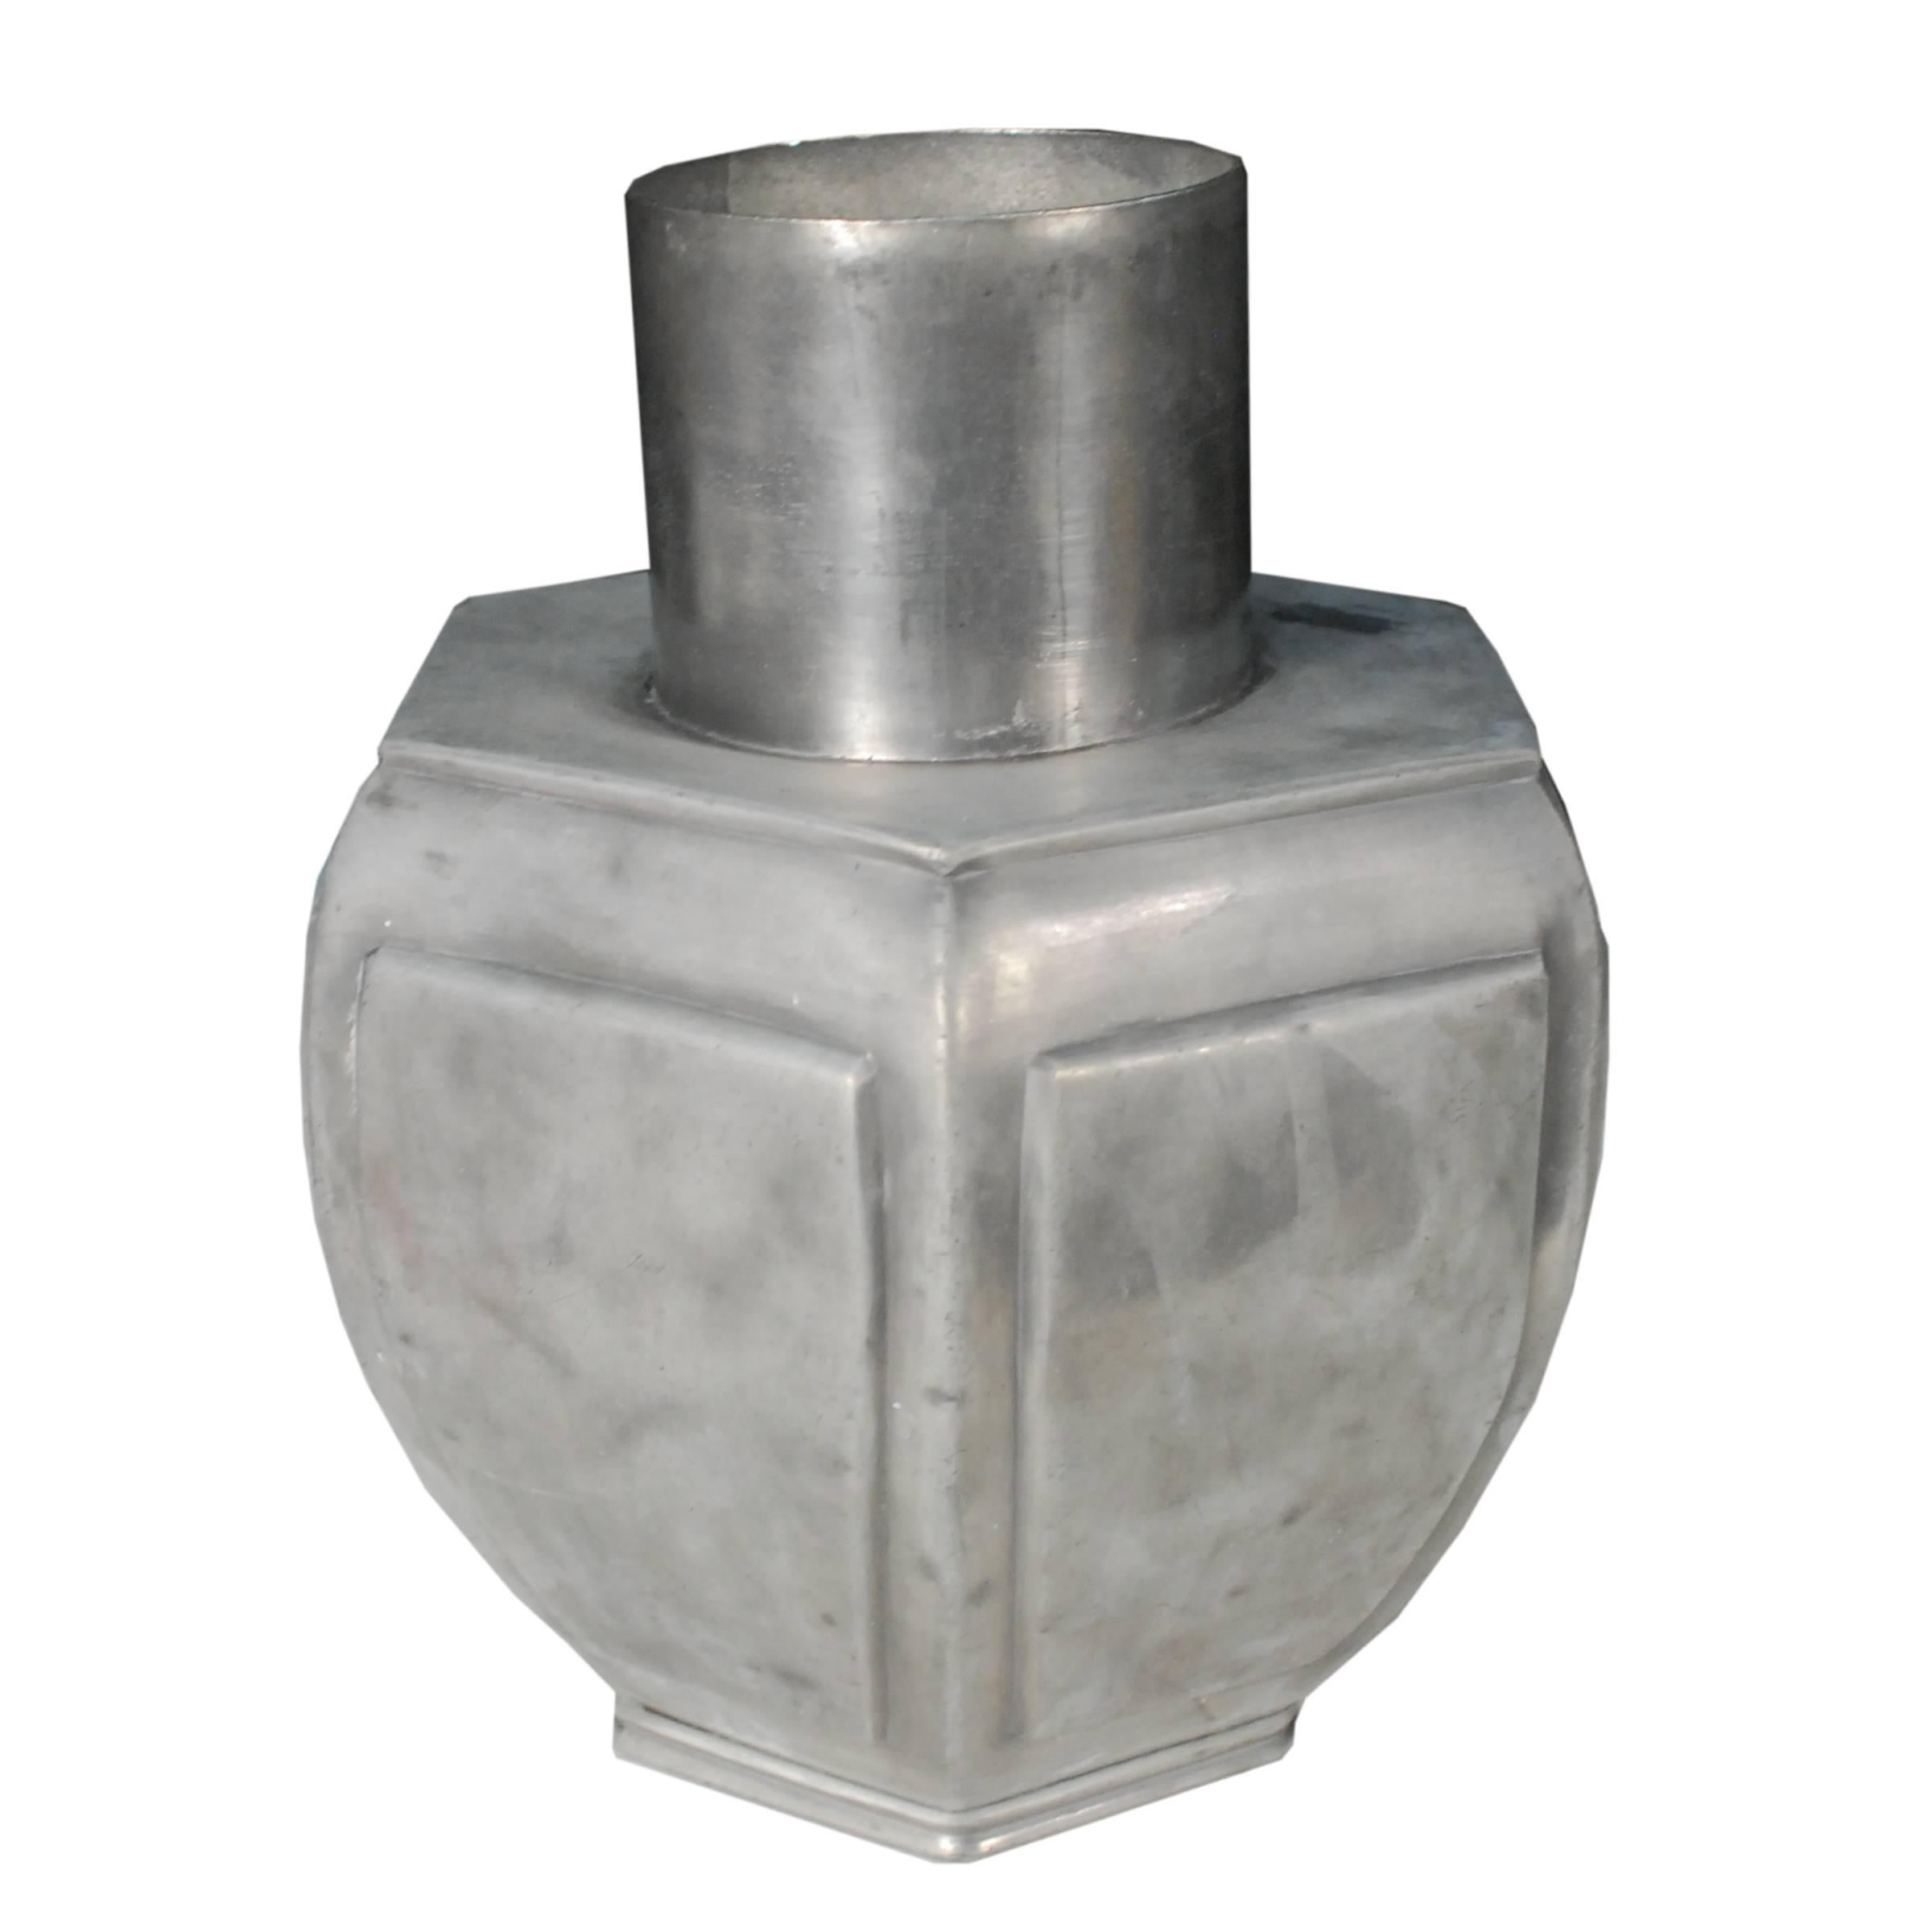 Chinese Tea Leaf Canister